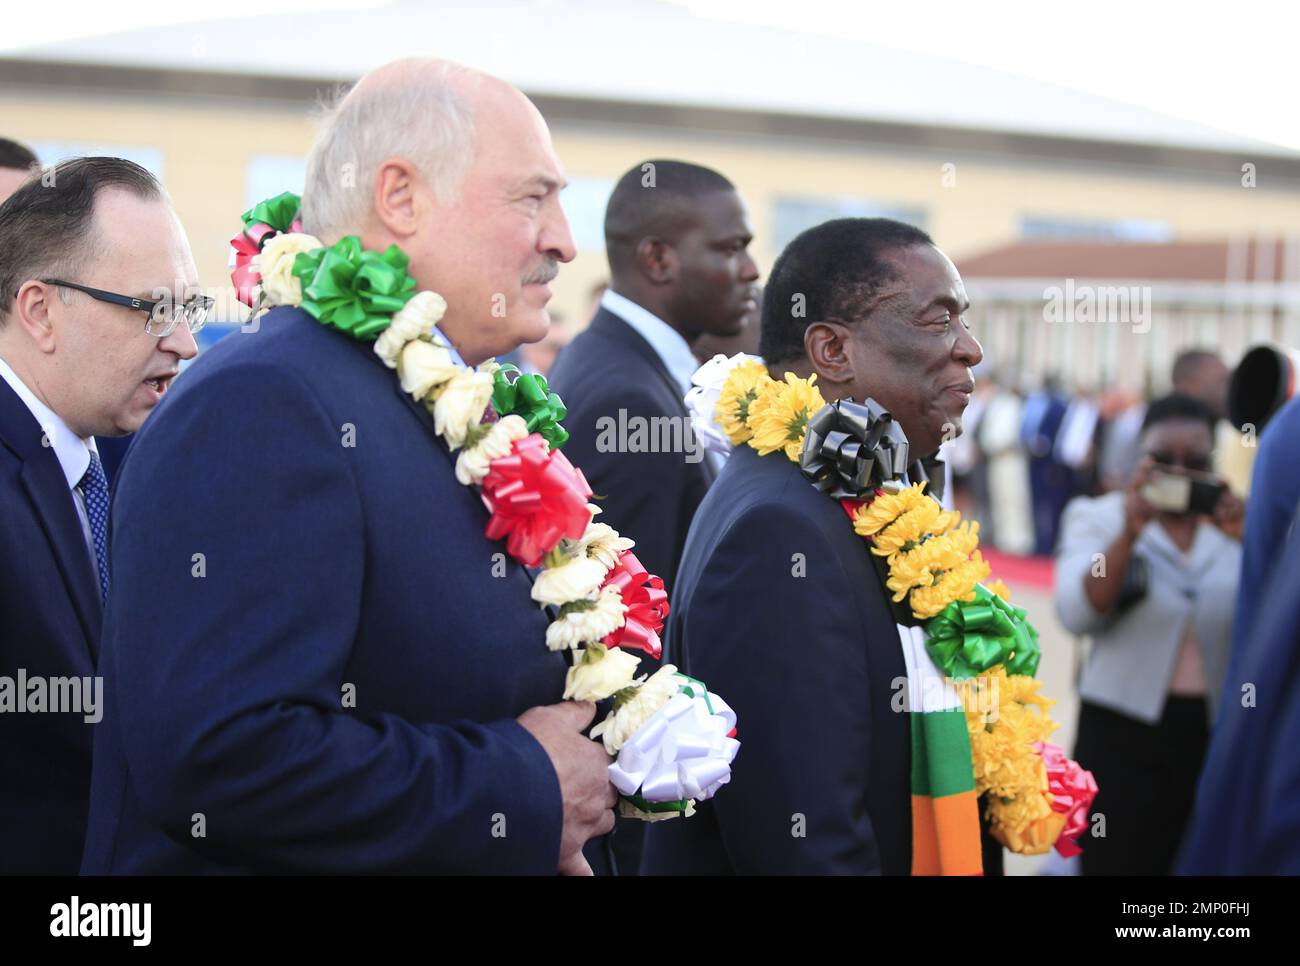 Harare, Robert Gabriel Mugabe International Airport in Harare. 30th Jan, 2023. The president of Belarus, Alexander Lukashenko (front L), accompanied by Zimbabwean President Emmerson Mnangagwa (R), inspects a guard of honor after arriving at Robert Gabriel Mugabe International Airport in Harare, Zimbabwe on Jan. 30, 2023. Credit: Shaun Jusa/Xinhua/Alamy Live News Stock Photo